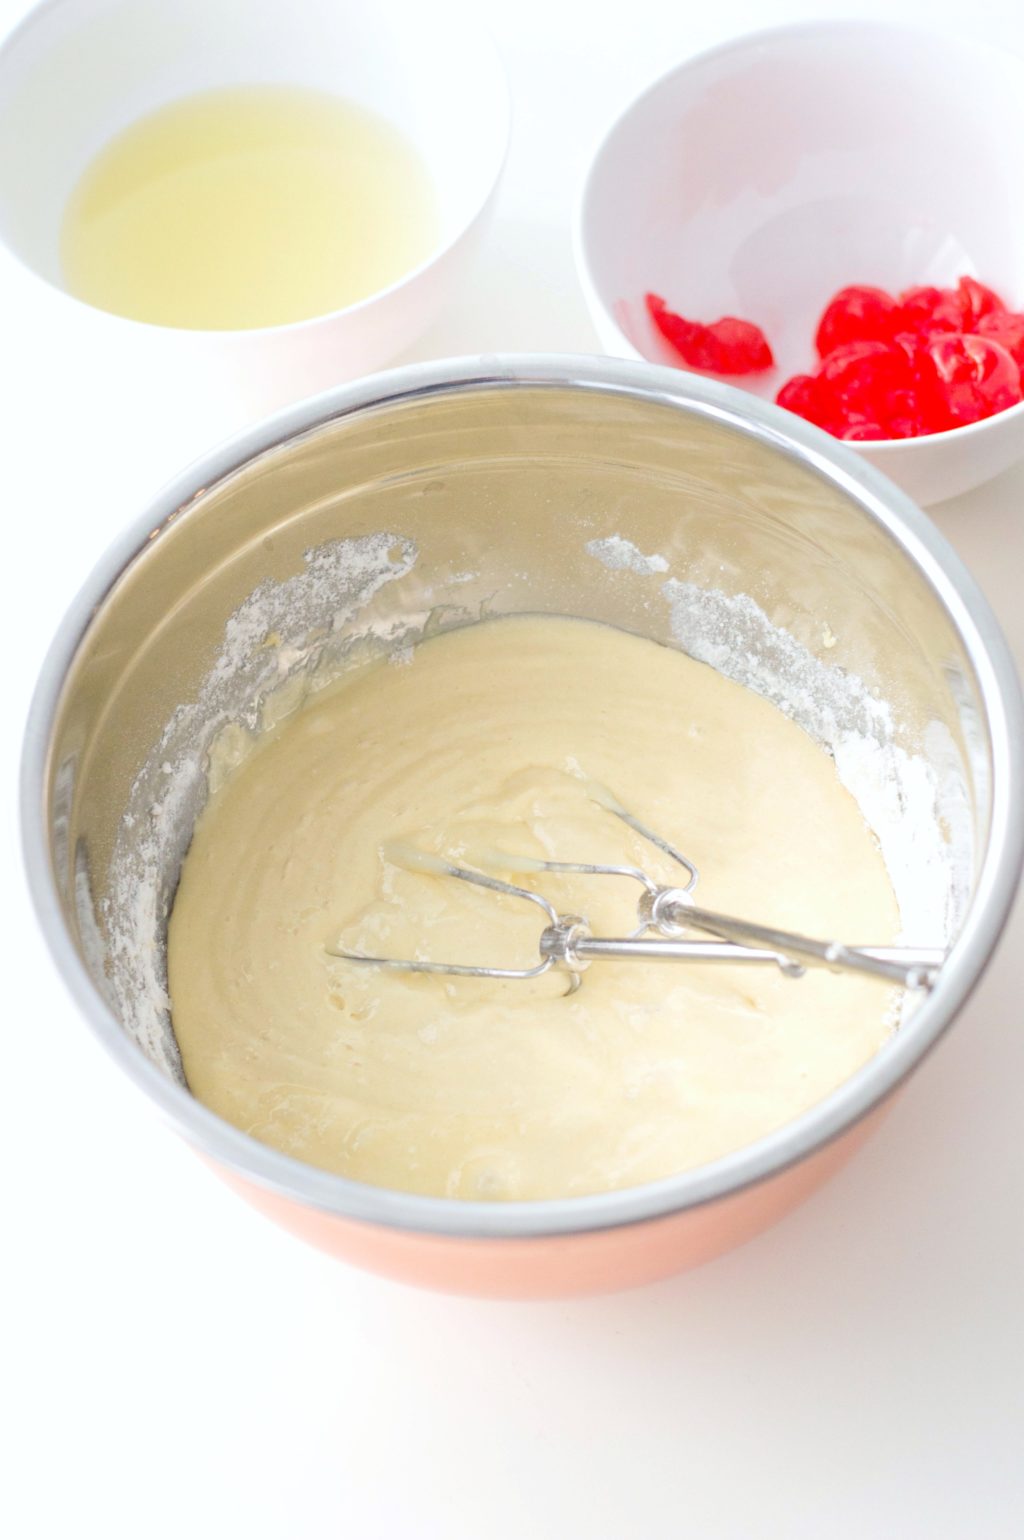 Batter is prepared and mixed in a bowl. Two whisks are inside the mixing bowls.